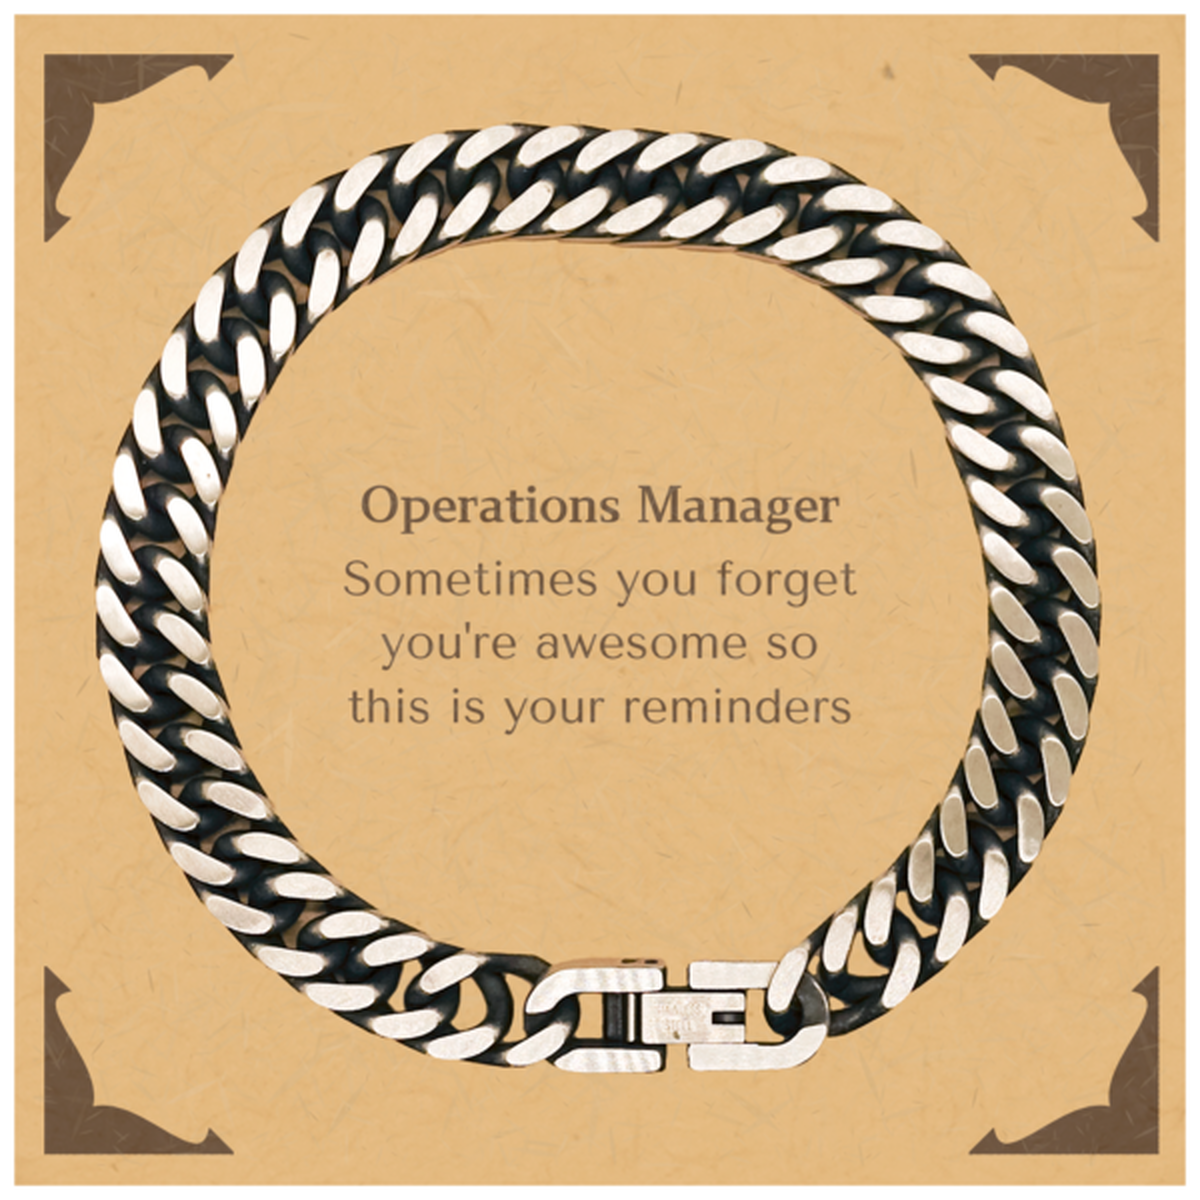 Sentimental Operations Manager Cuban Link Chain Bracelet, Operations Manager Sometimes you forget you're awesome so this is your reminders, Graduation Christmas Birthday Gifts for Operations Manager, Men, Women, Coworkers